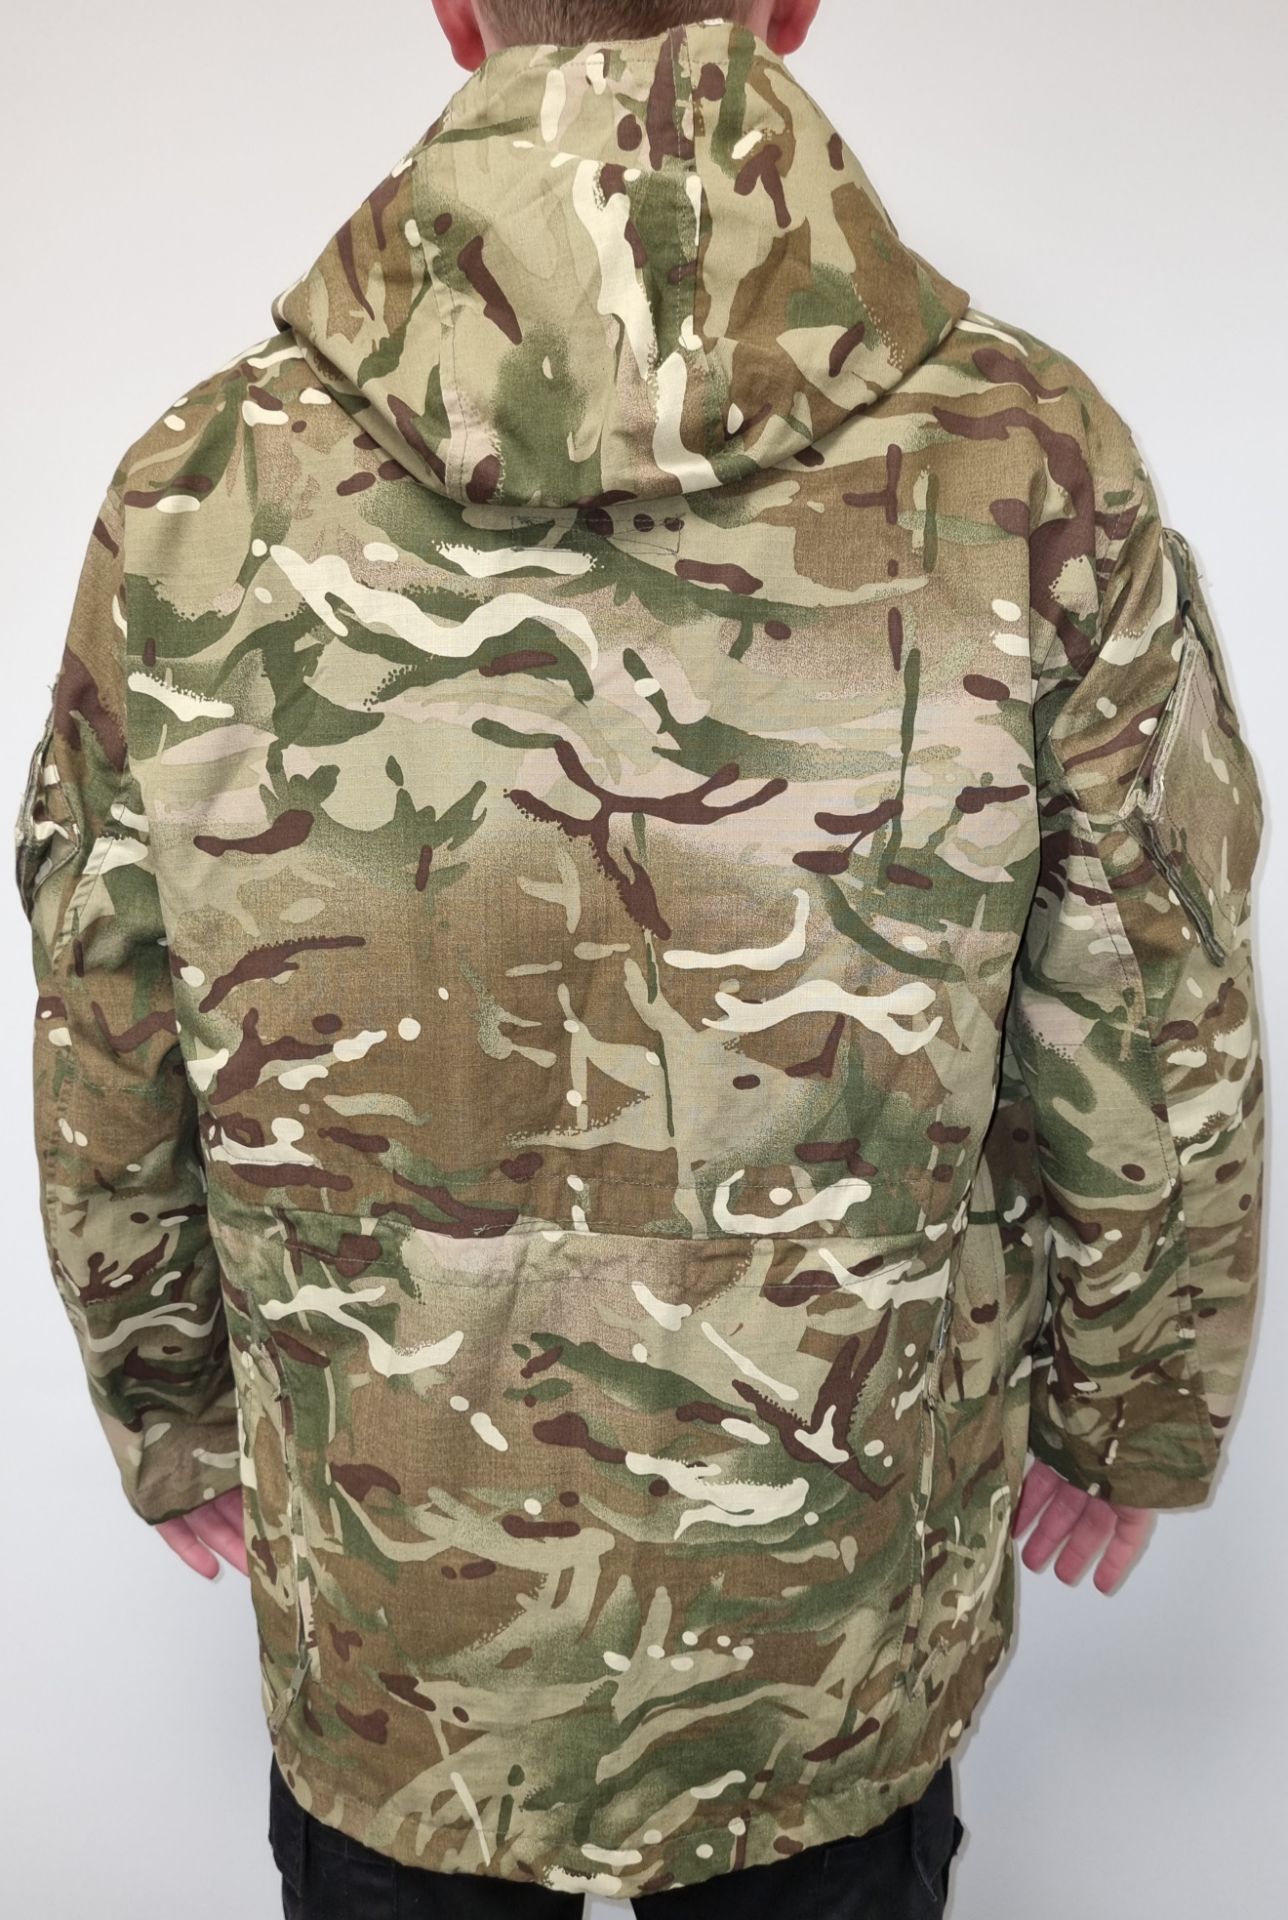 25x British Army MTP windproof smocks - mixed grades and sizes - Image 4 of 9